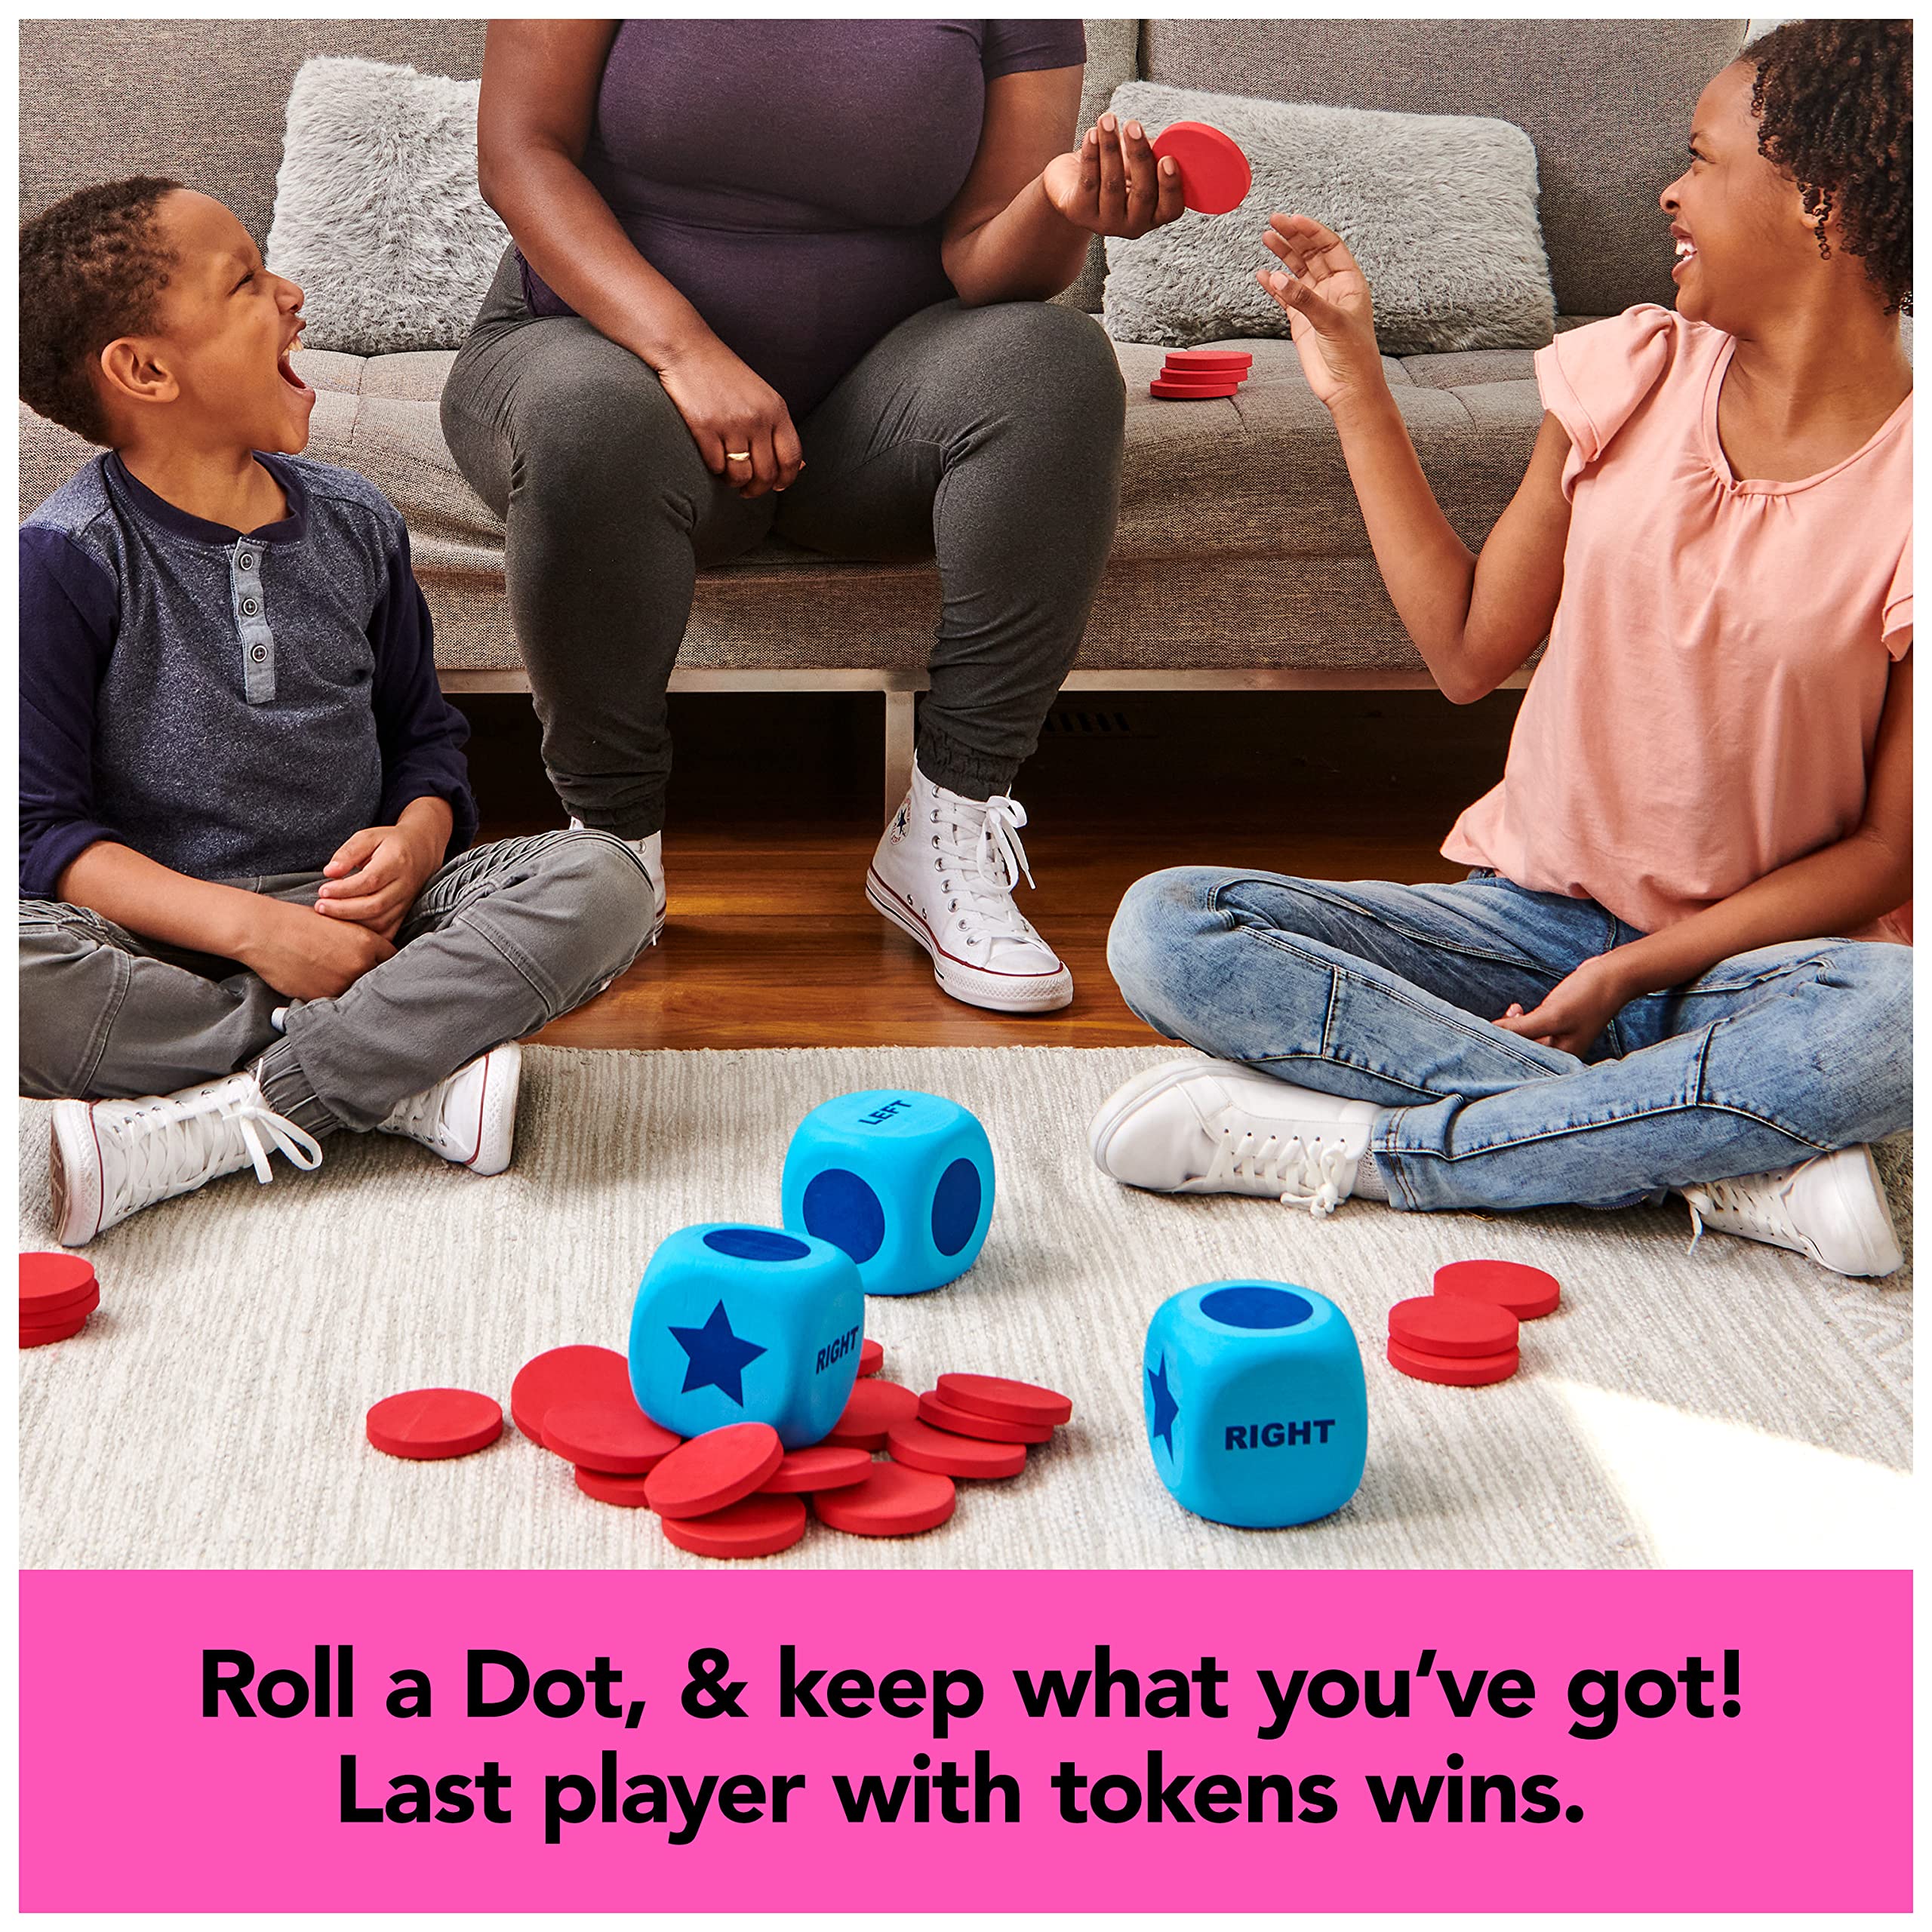 Giant Left Center Right, Classic Family Board Game Summer Toy with Big, Oversized Dice & Tokens, for Kids and Adults Ages 6 and up